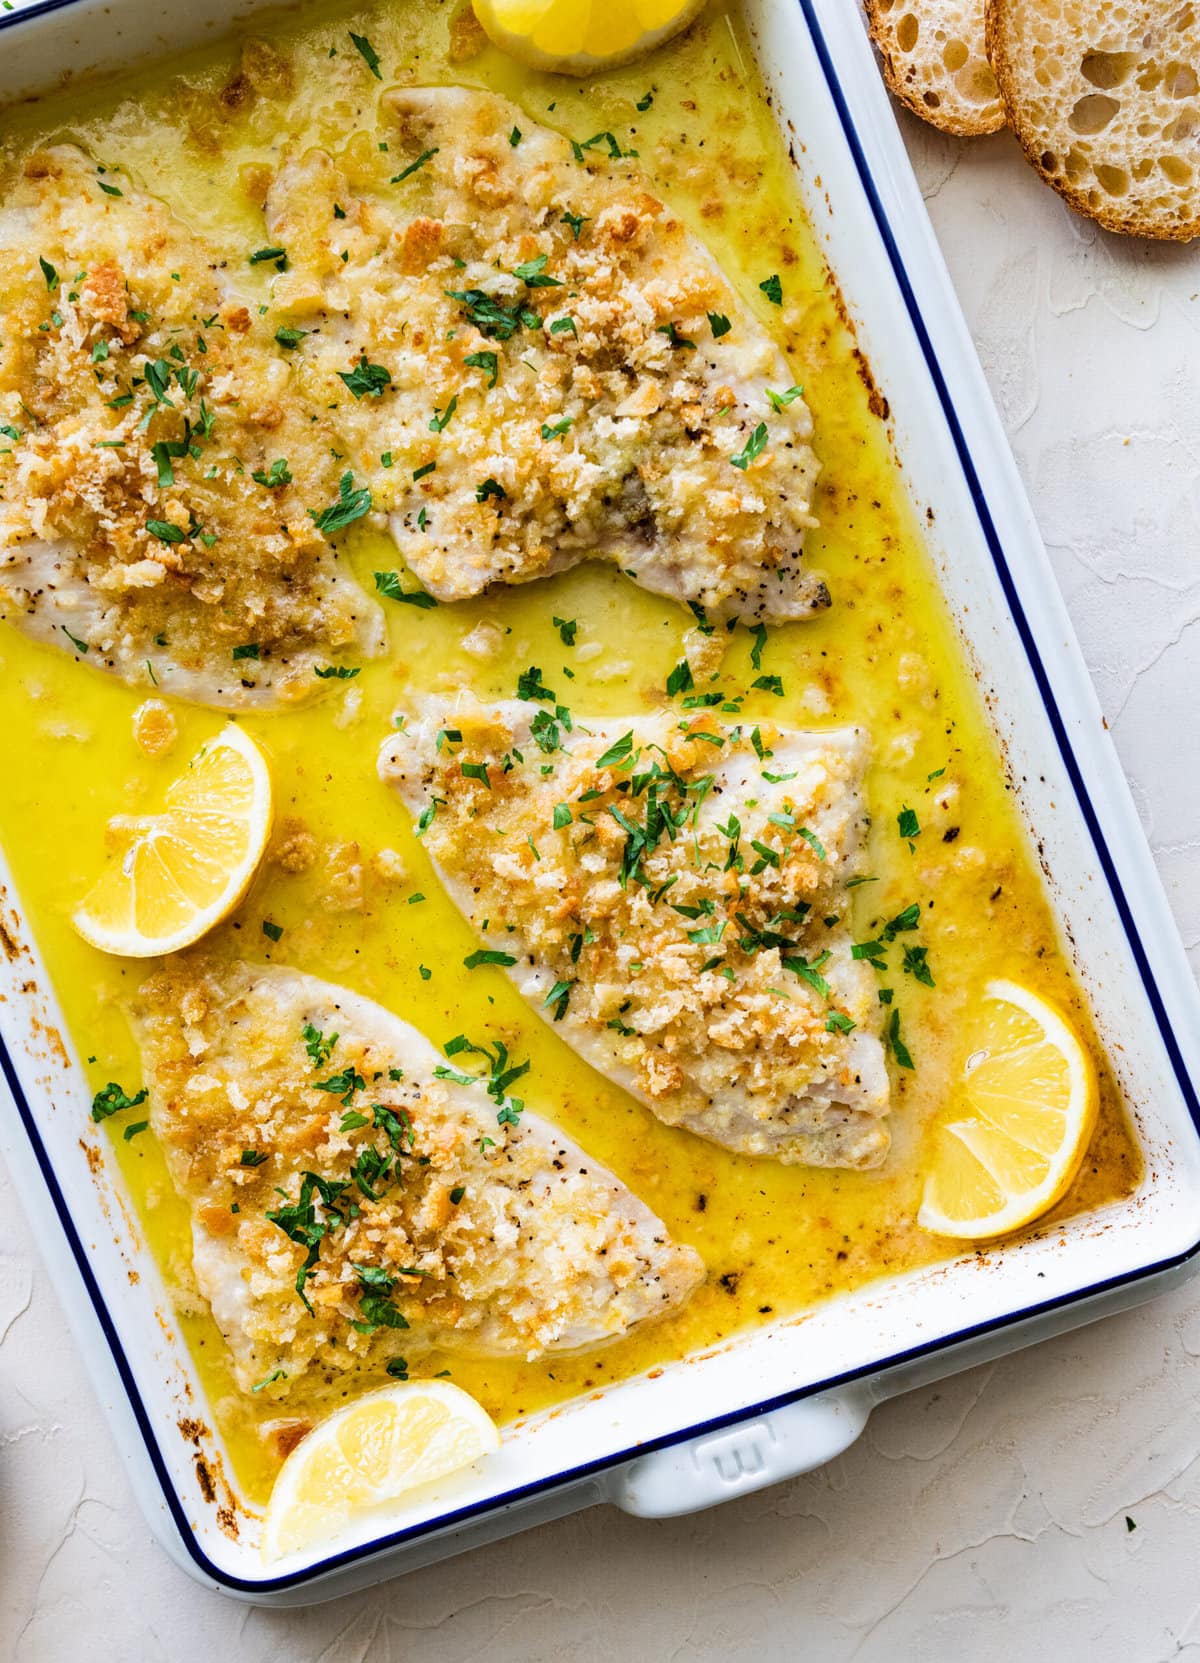 Baked Flounder Recipe with Lemon- fish with sauce after it is baked. Serve with lemon wedges.